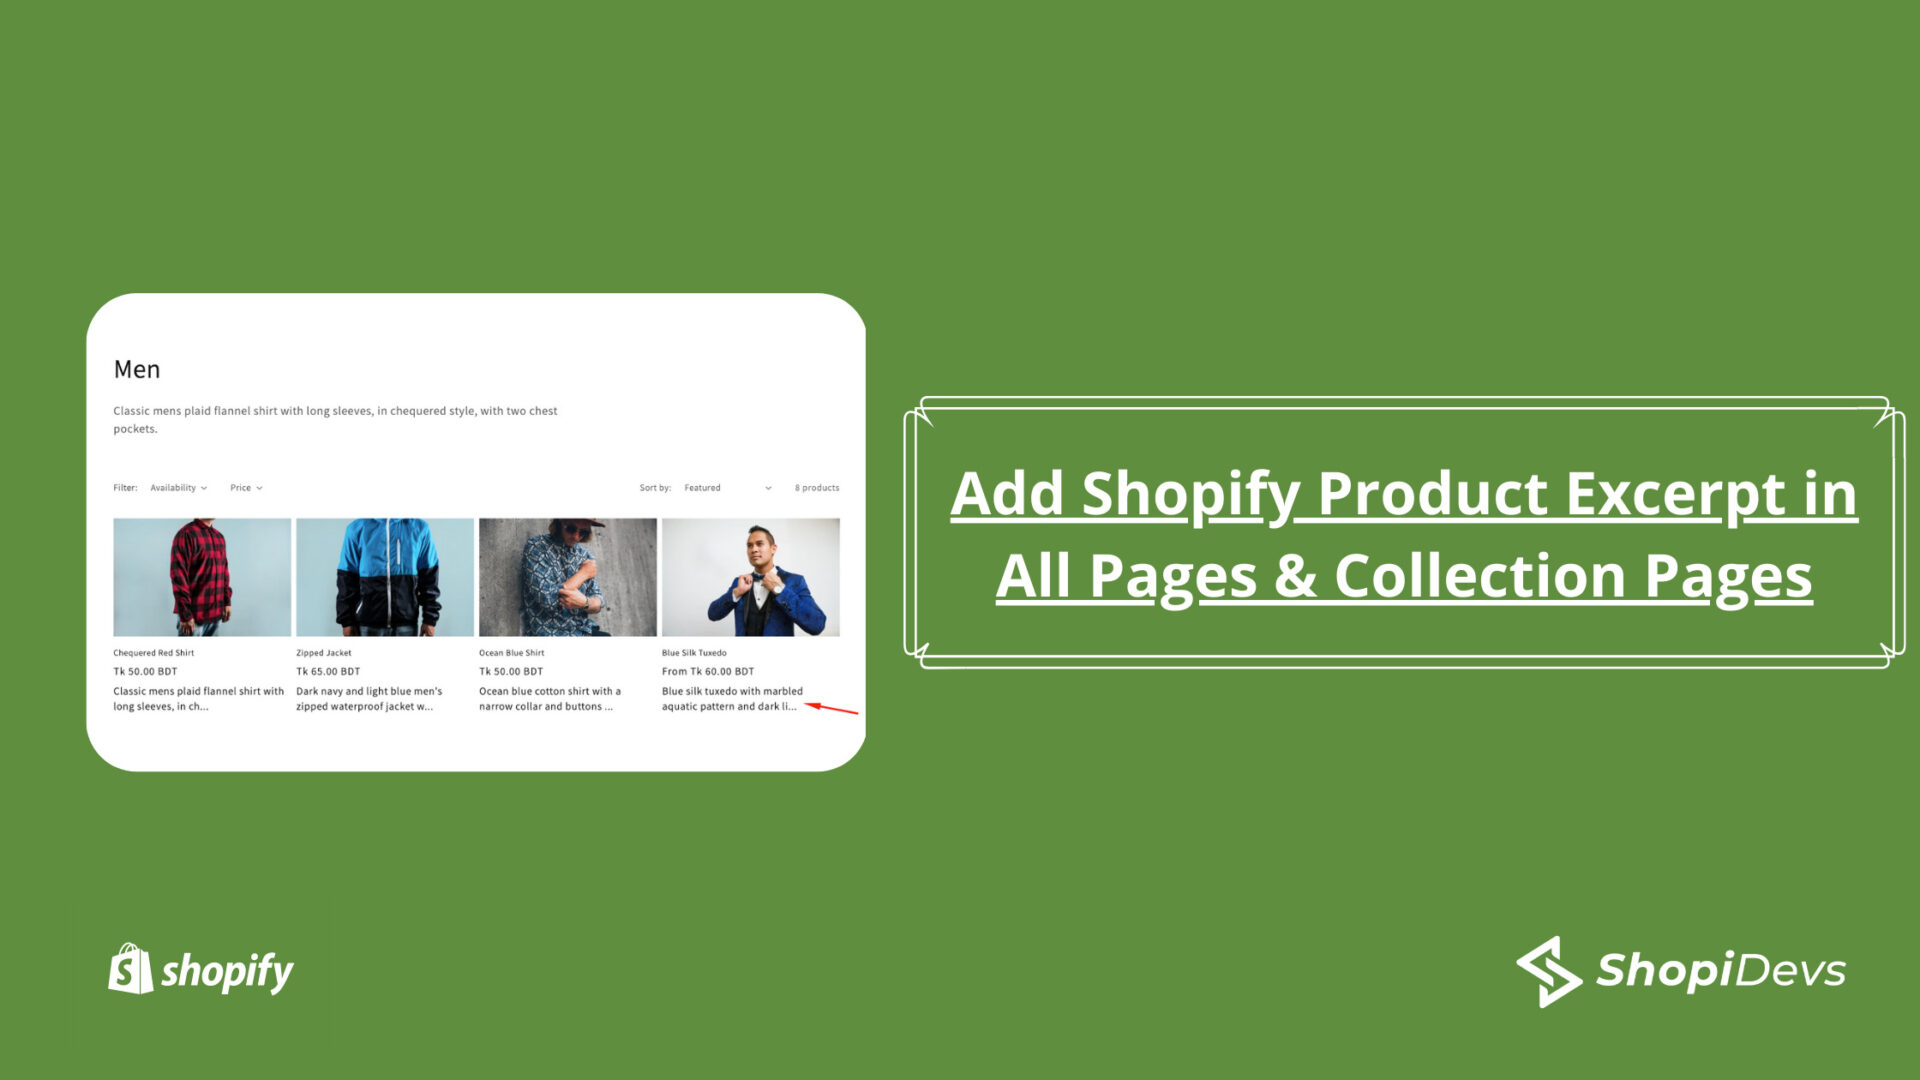 Add Shopify Product Excerpt in All Pages & Collection Pages